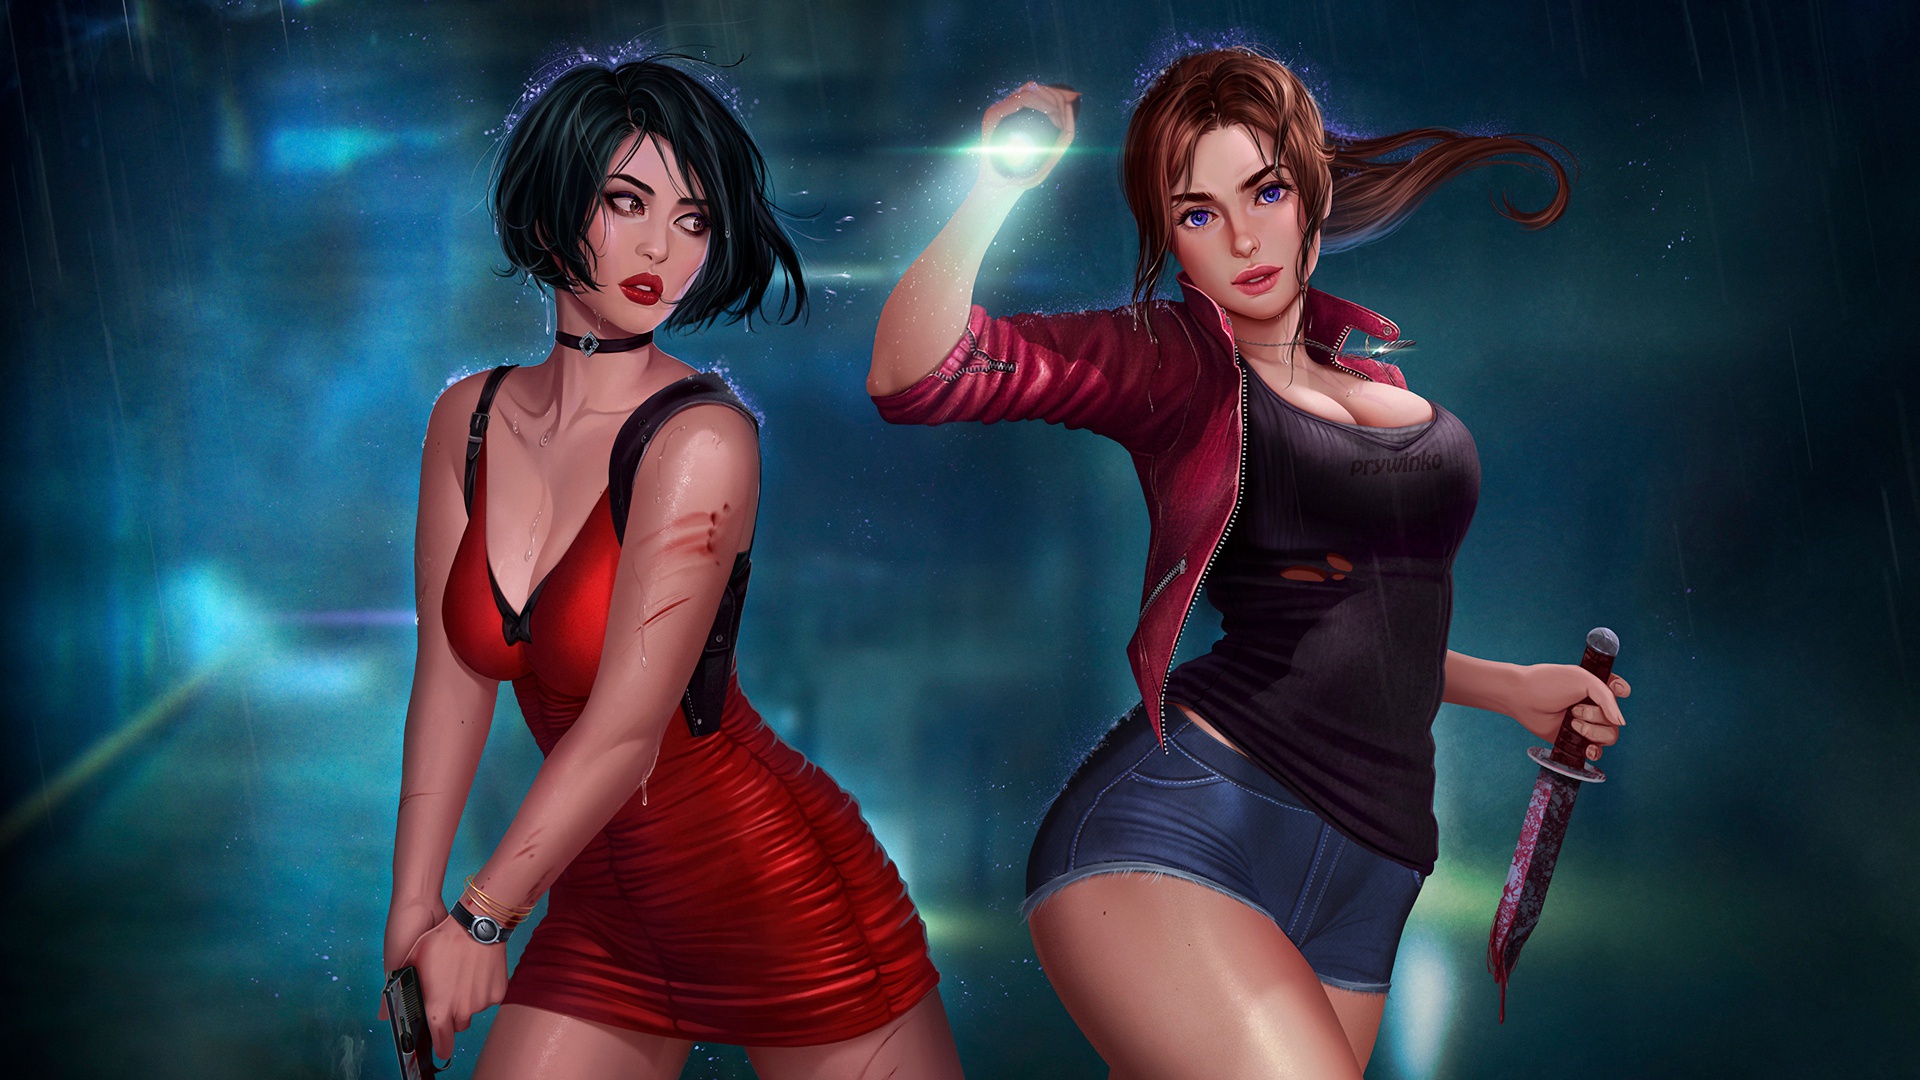 Ada Wong Claire Redfield Resident Evil 2 2019 1920x1080